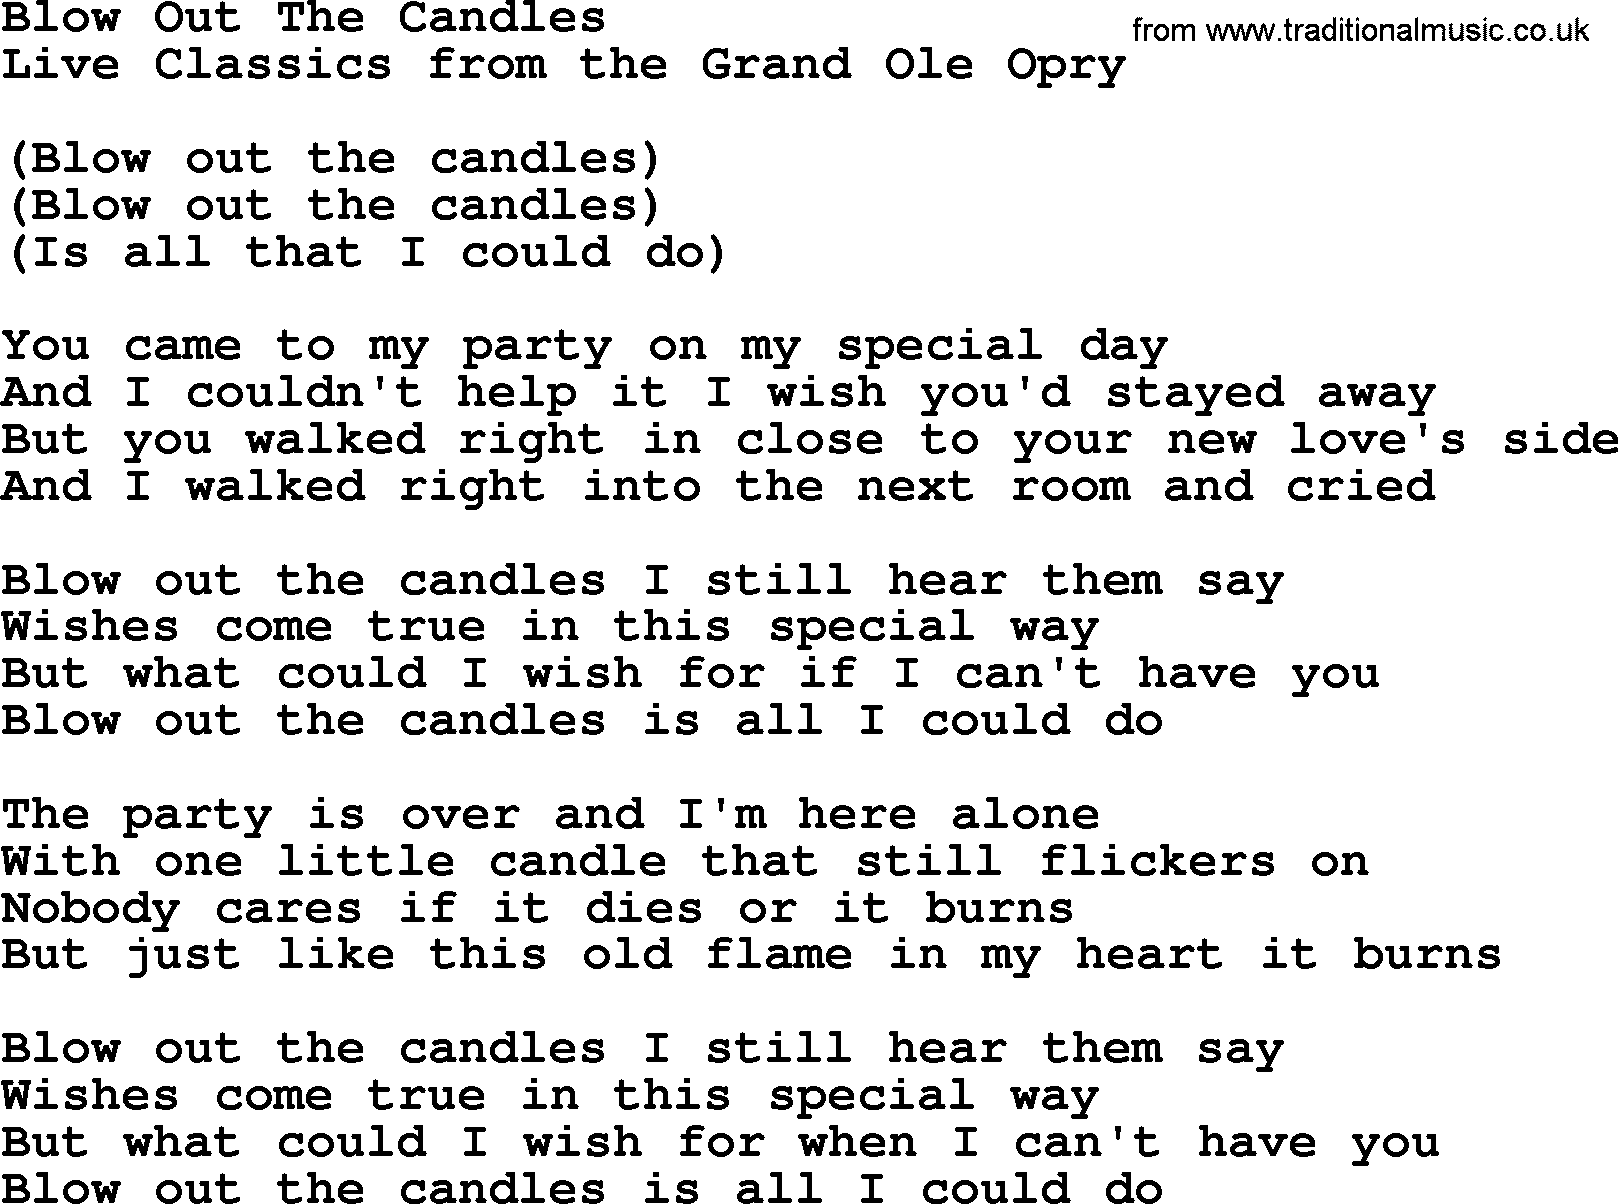 Marty Robbins song: Blow Out The Candles, lyrics